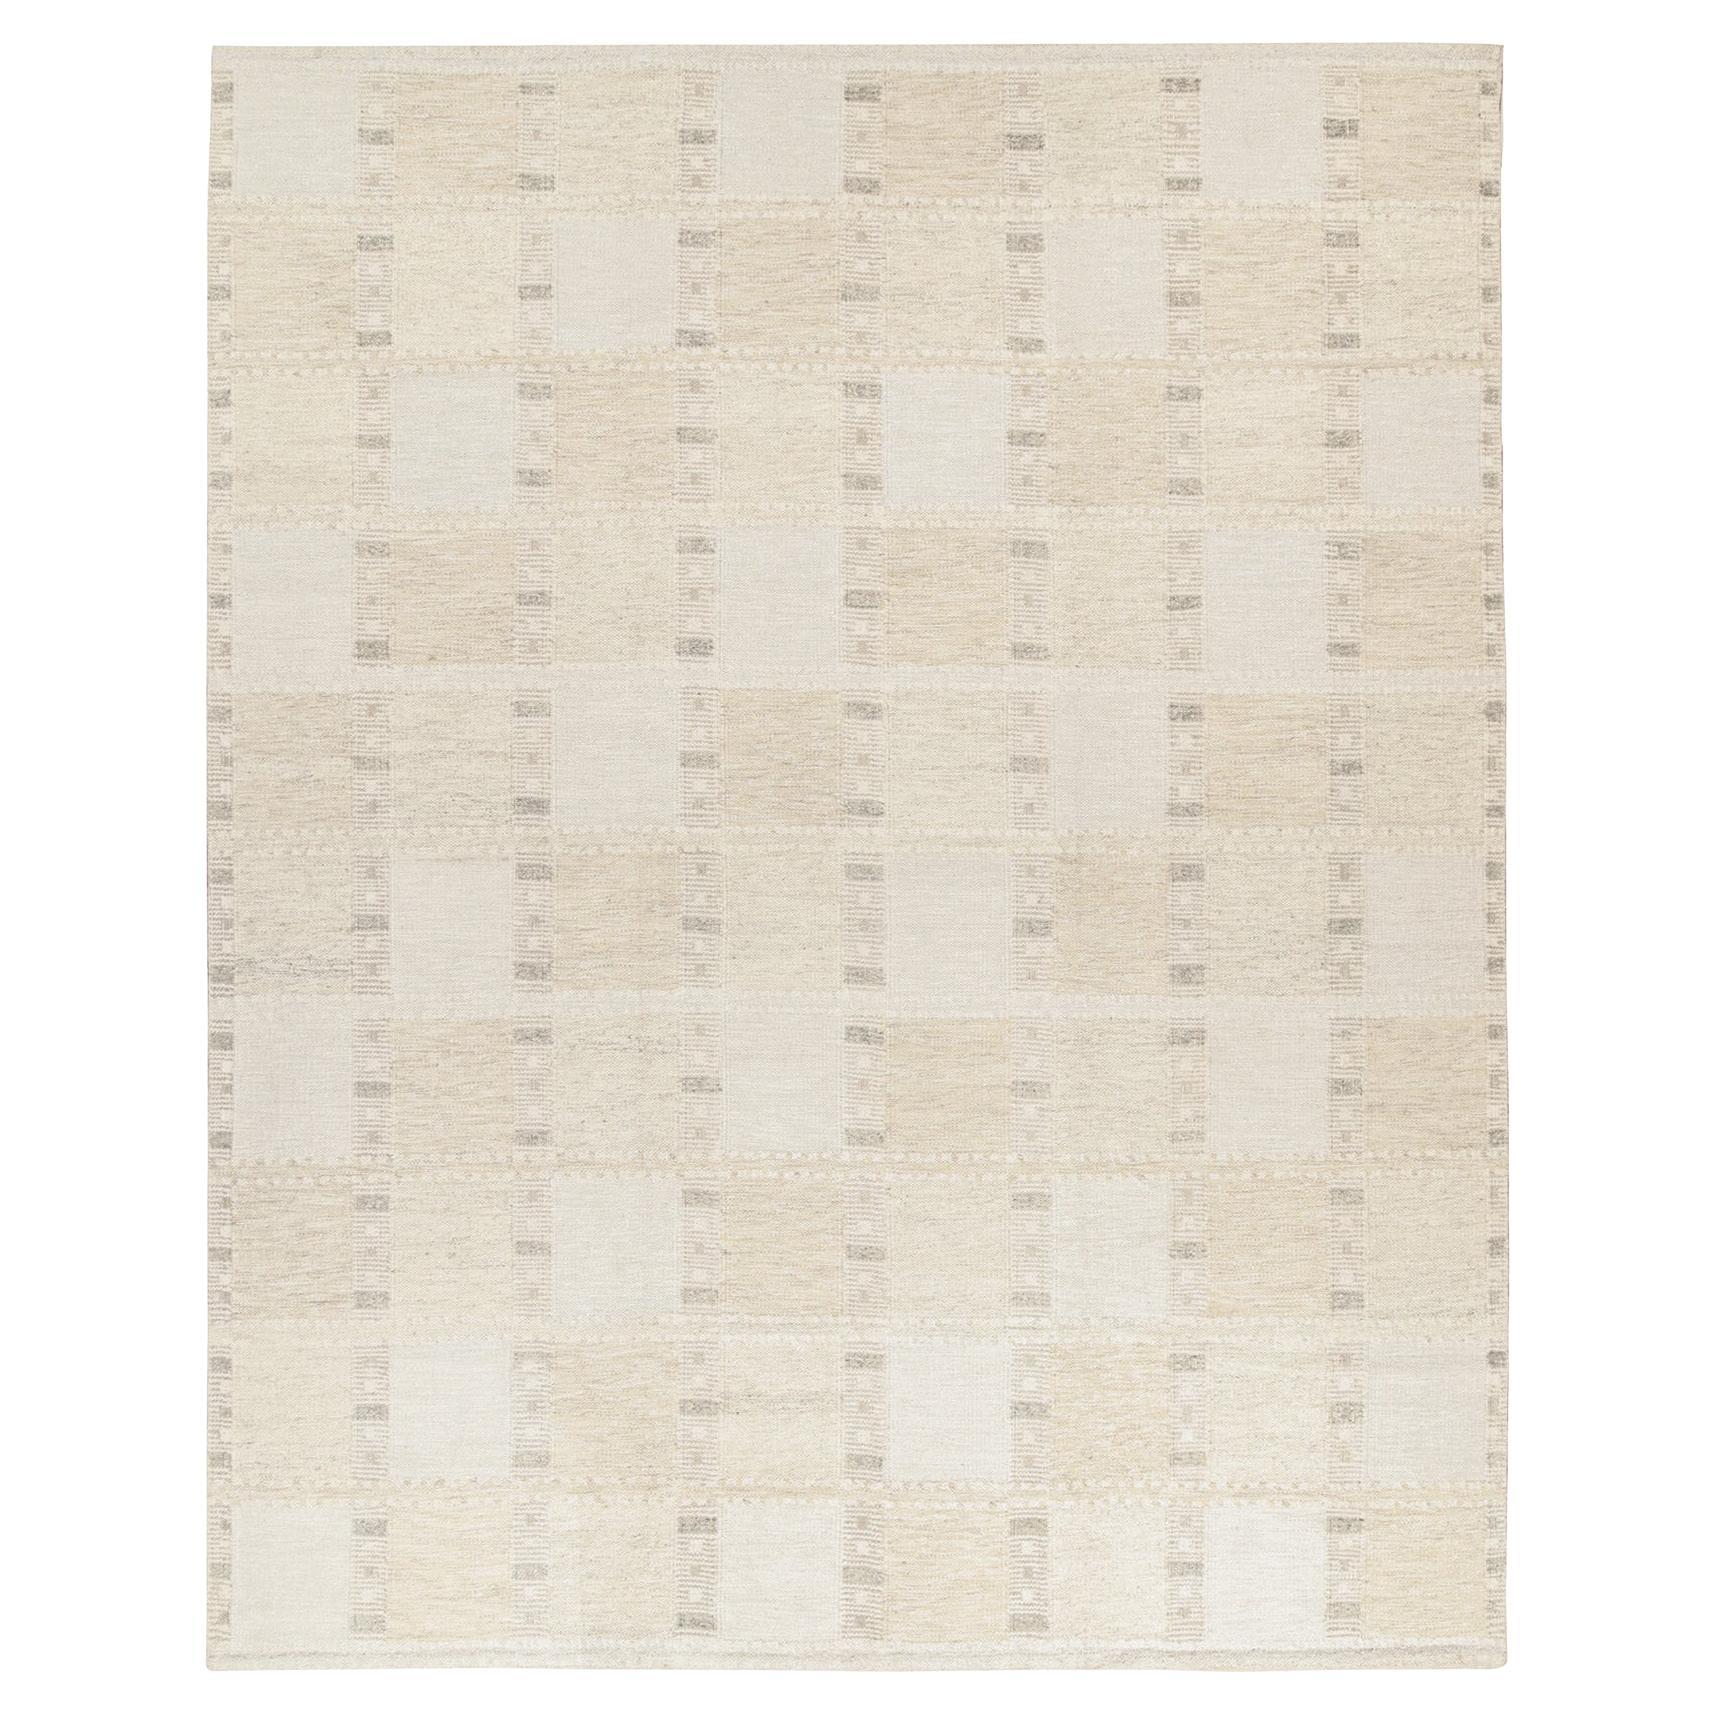 Rug & Kilim’s Scandinavian Style Kilim with Taupe and Beige Geometric Patterns